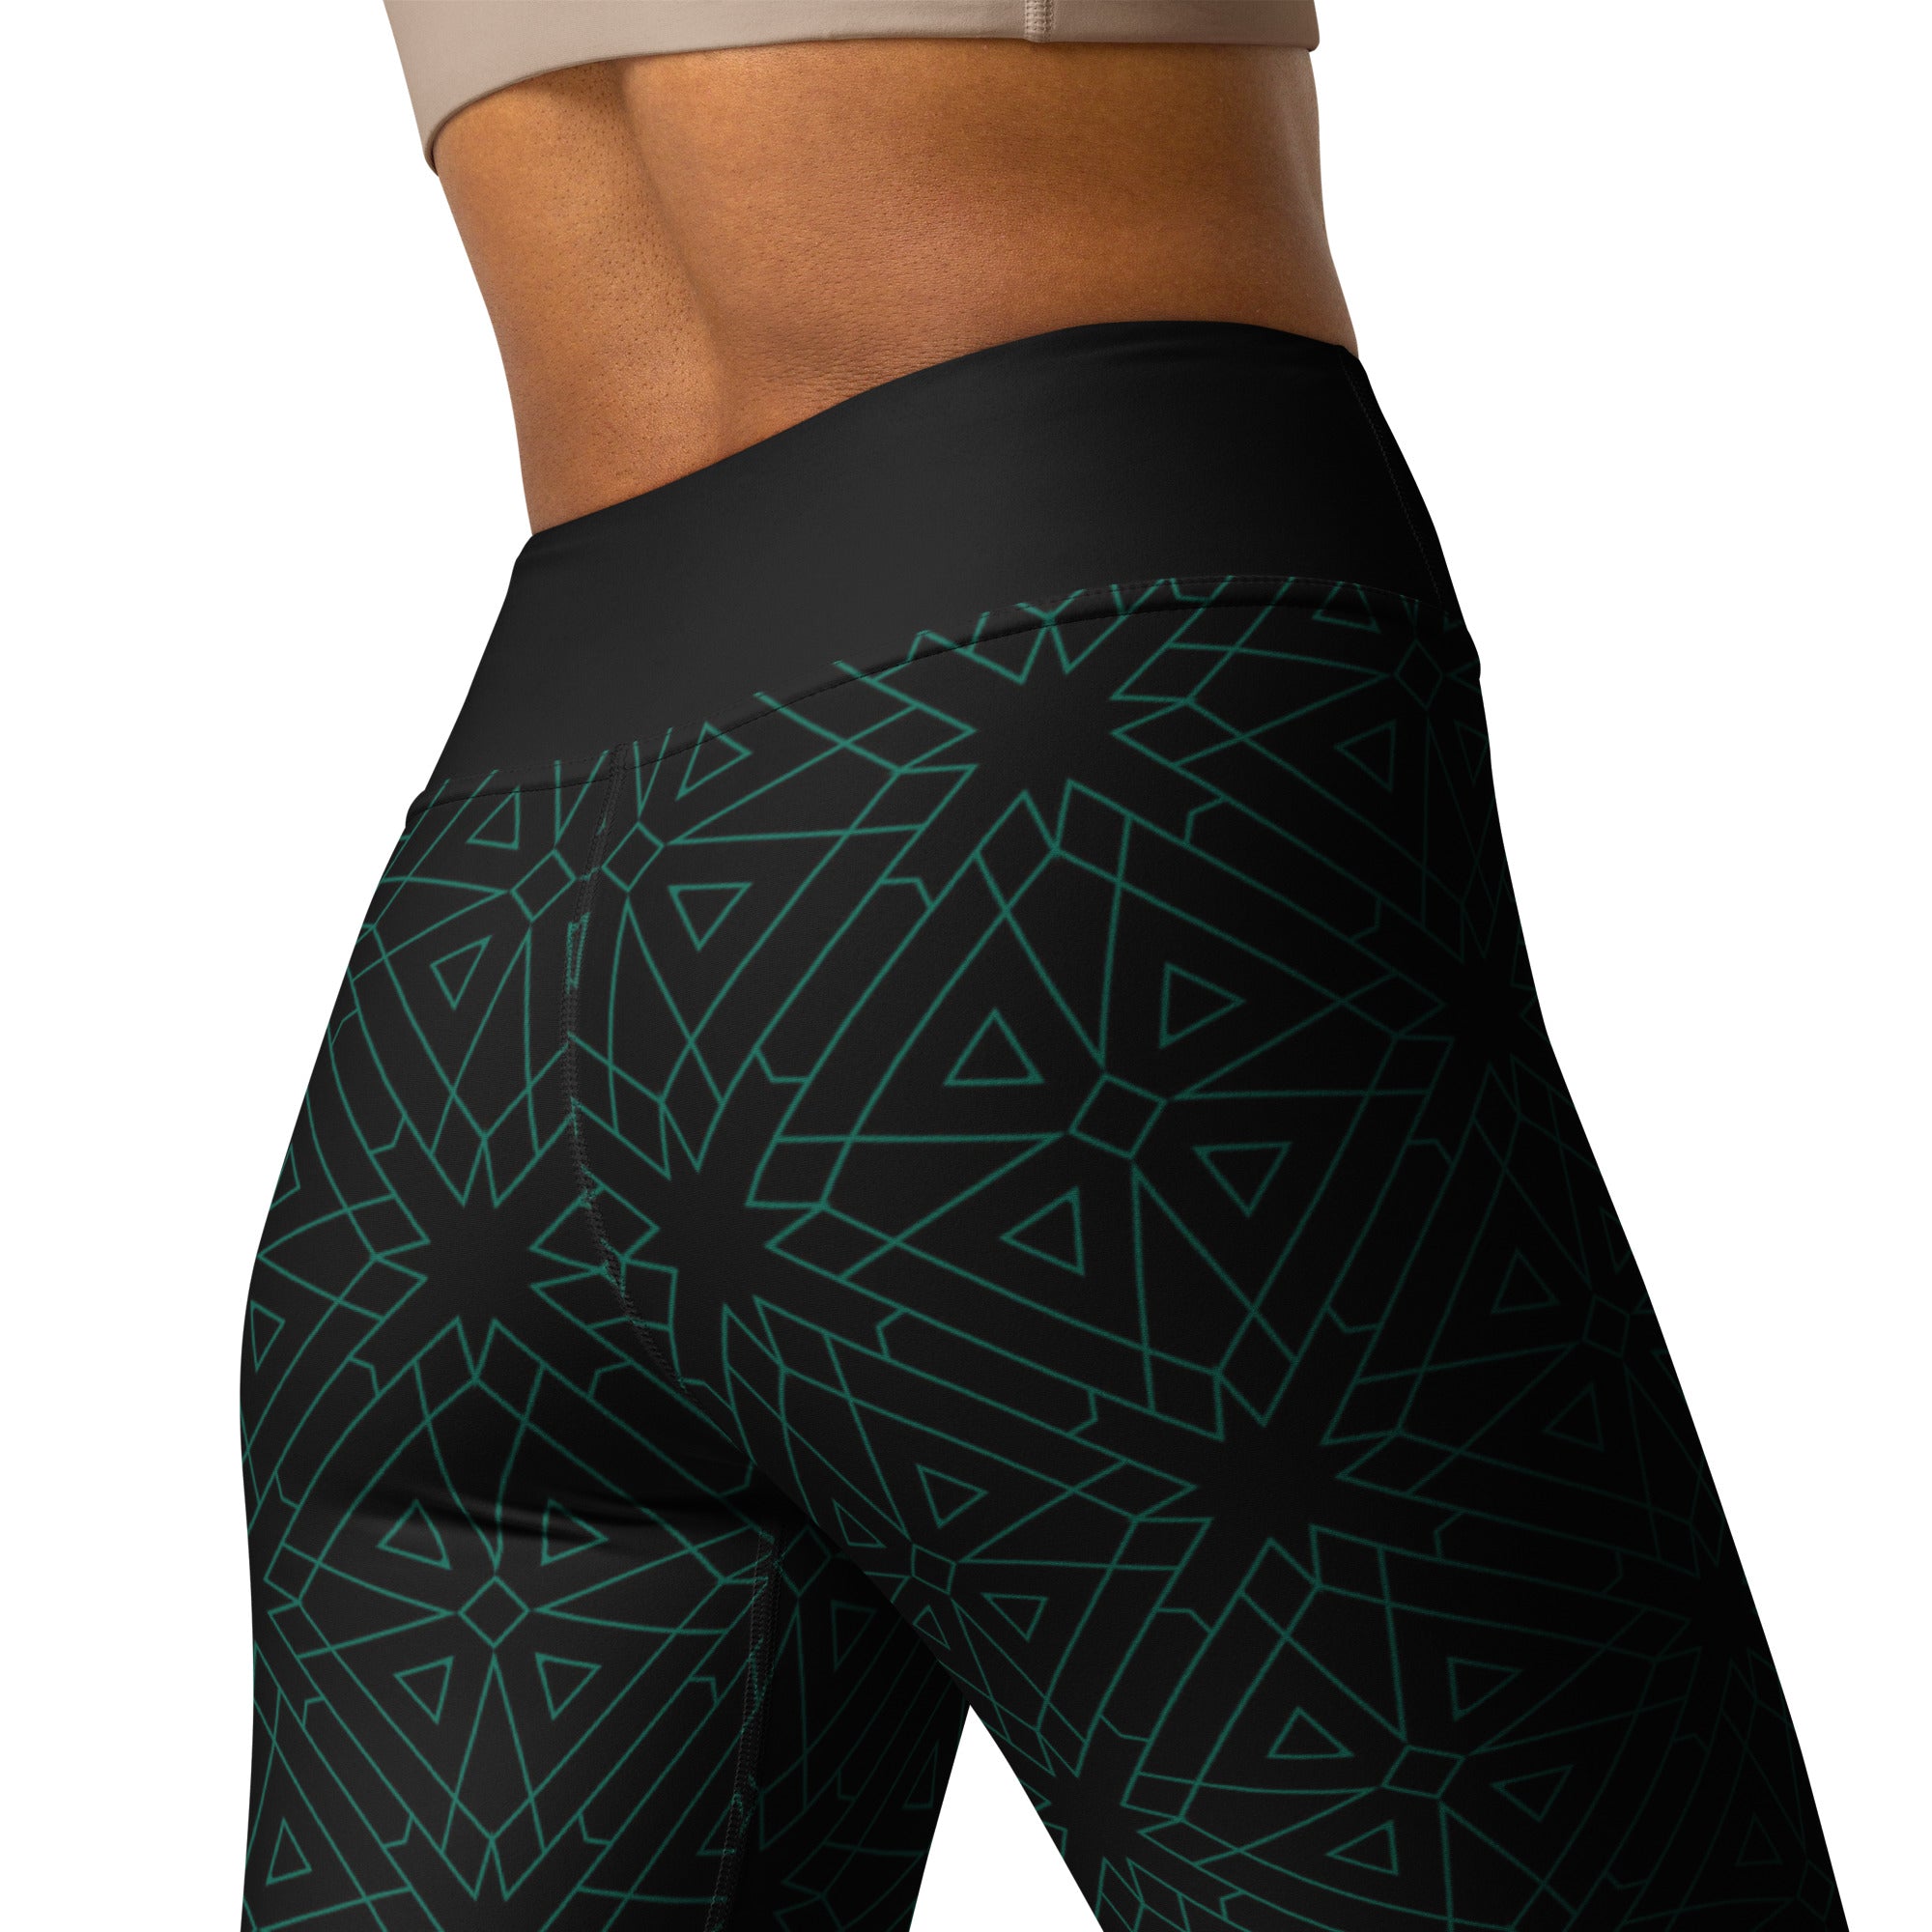 Close-up of the colorful Vibrant Vortex pattern on yoga leggings.